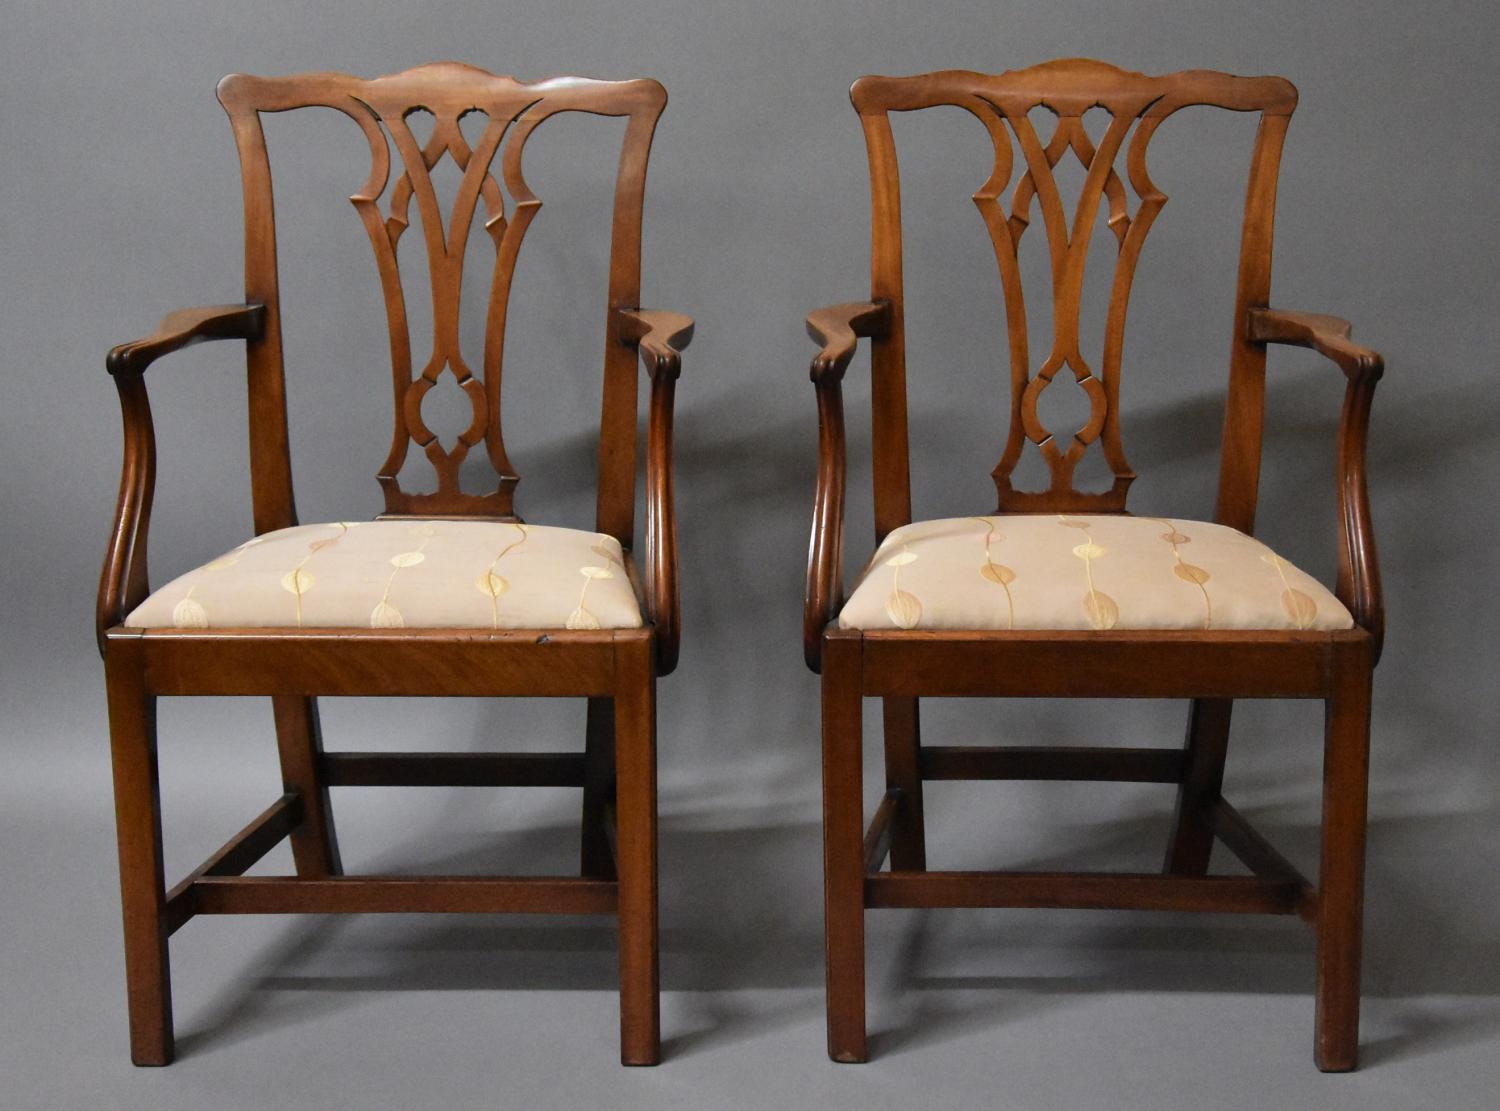 Pair of mahogany Chippendale style armchairs